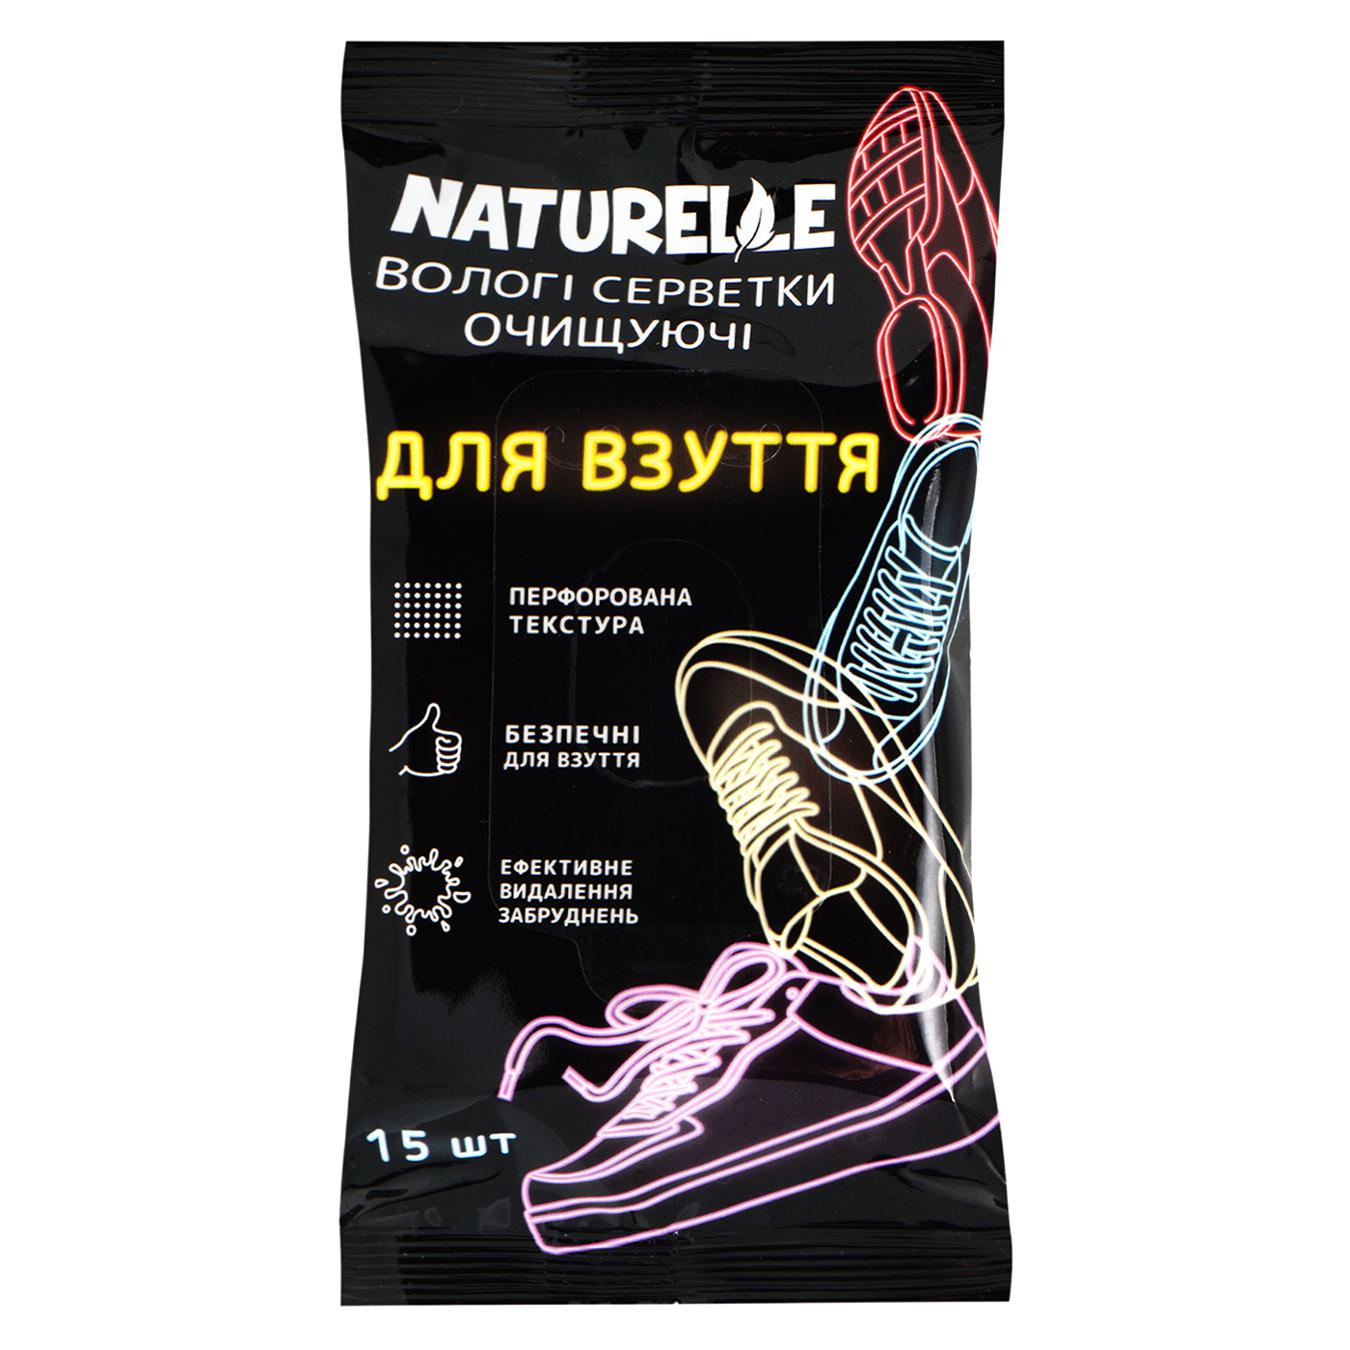 Naturelle wet wipes for cleaning shoes 15 pcs